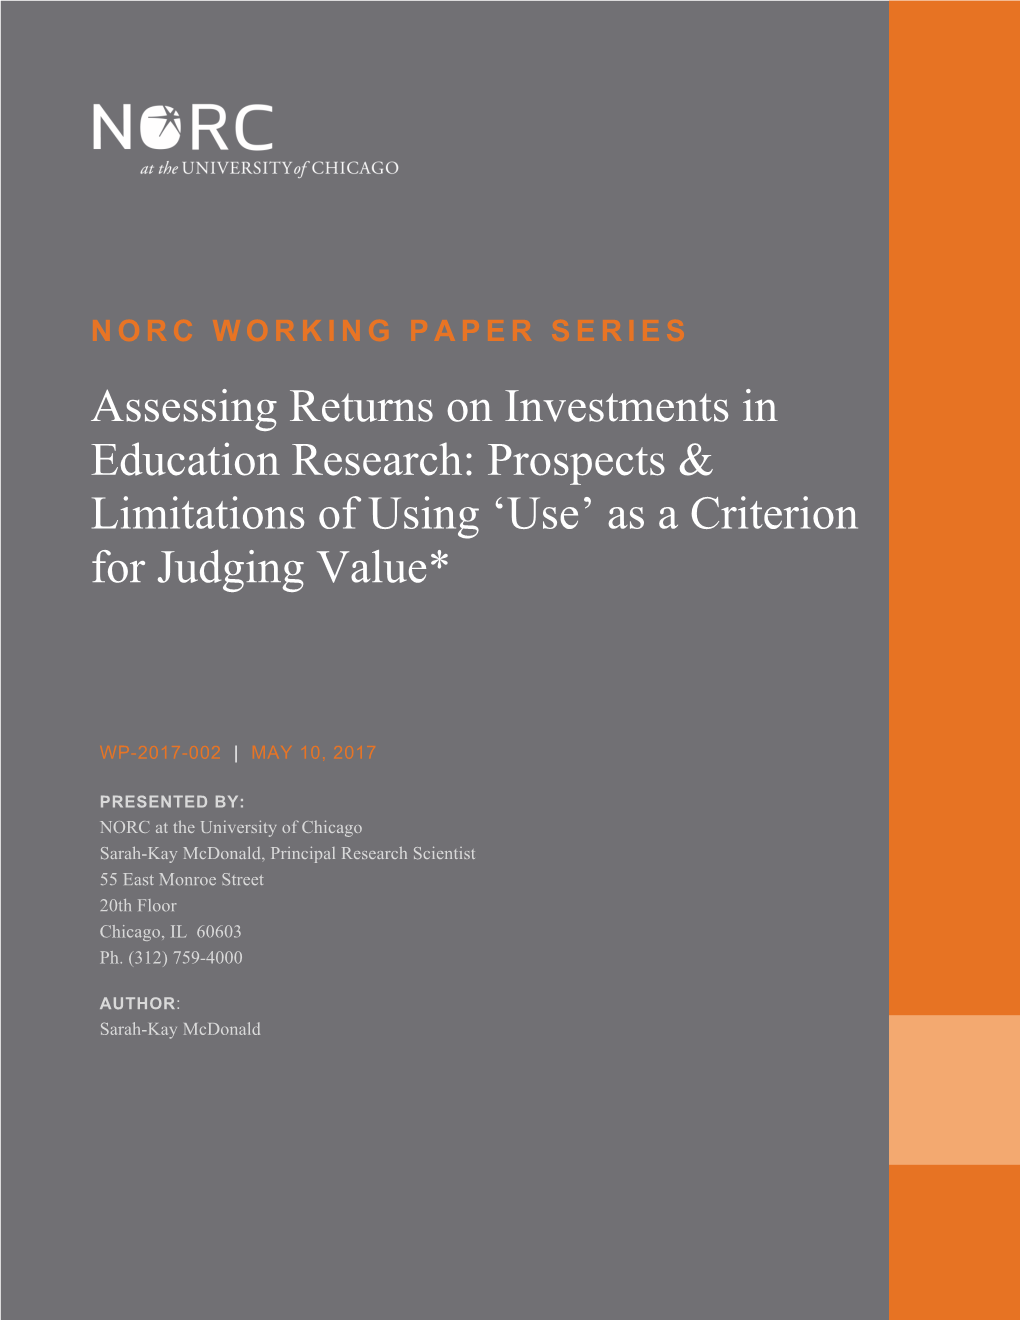 Assessing Returns on Investments in Education Research: Prospects & Limitations of Using ‘Use’ As a Criterion for Judging Value*